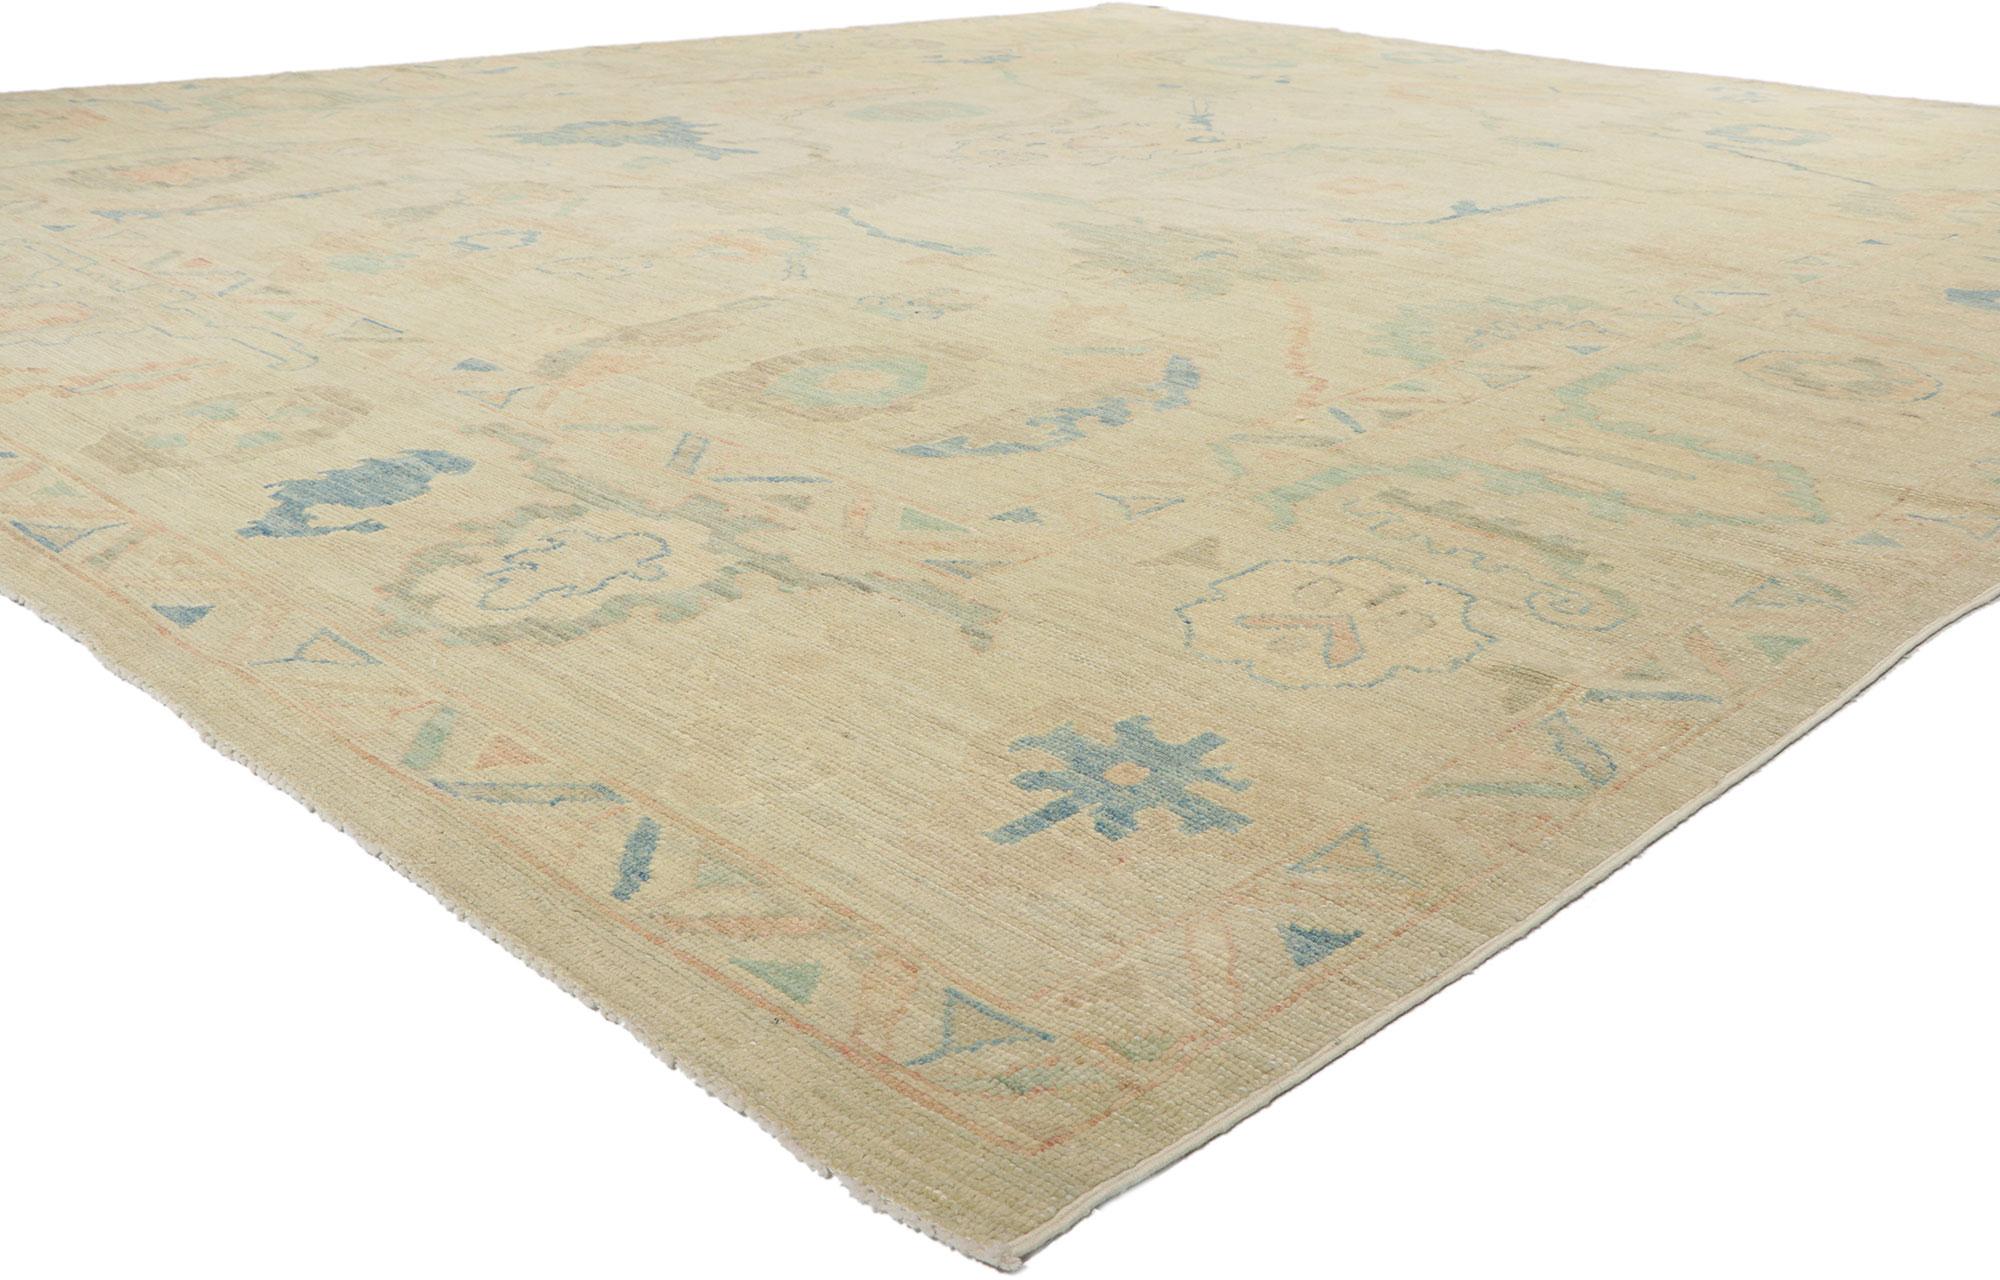 80934 Vintage-Inspired Modern Oushak Rug, 12'06 x 14'09.
Let yourself be whisked away on a journey of serenity, as you step onto this mesmerizing vintage-inspired modern Oushak rug. This magical carpet ride will transport you to a peaceful world of